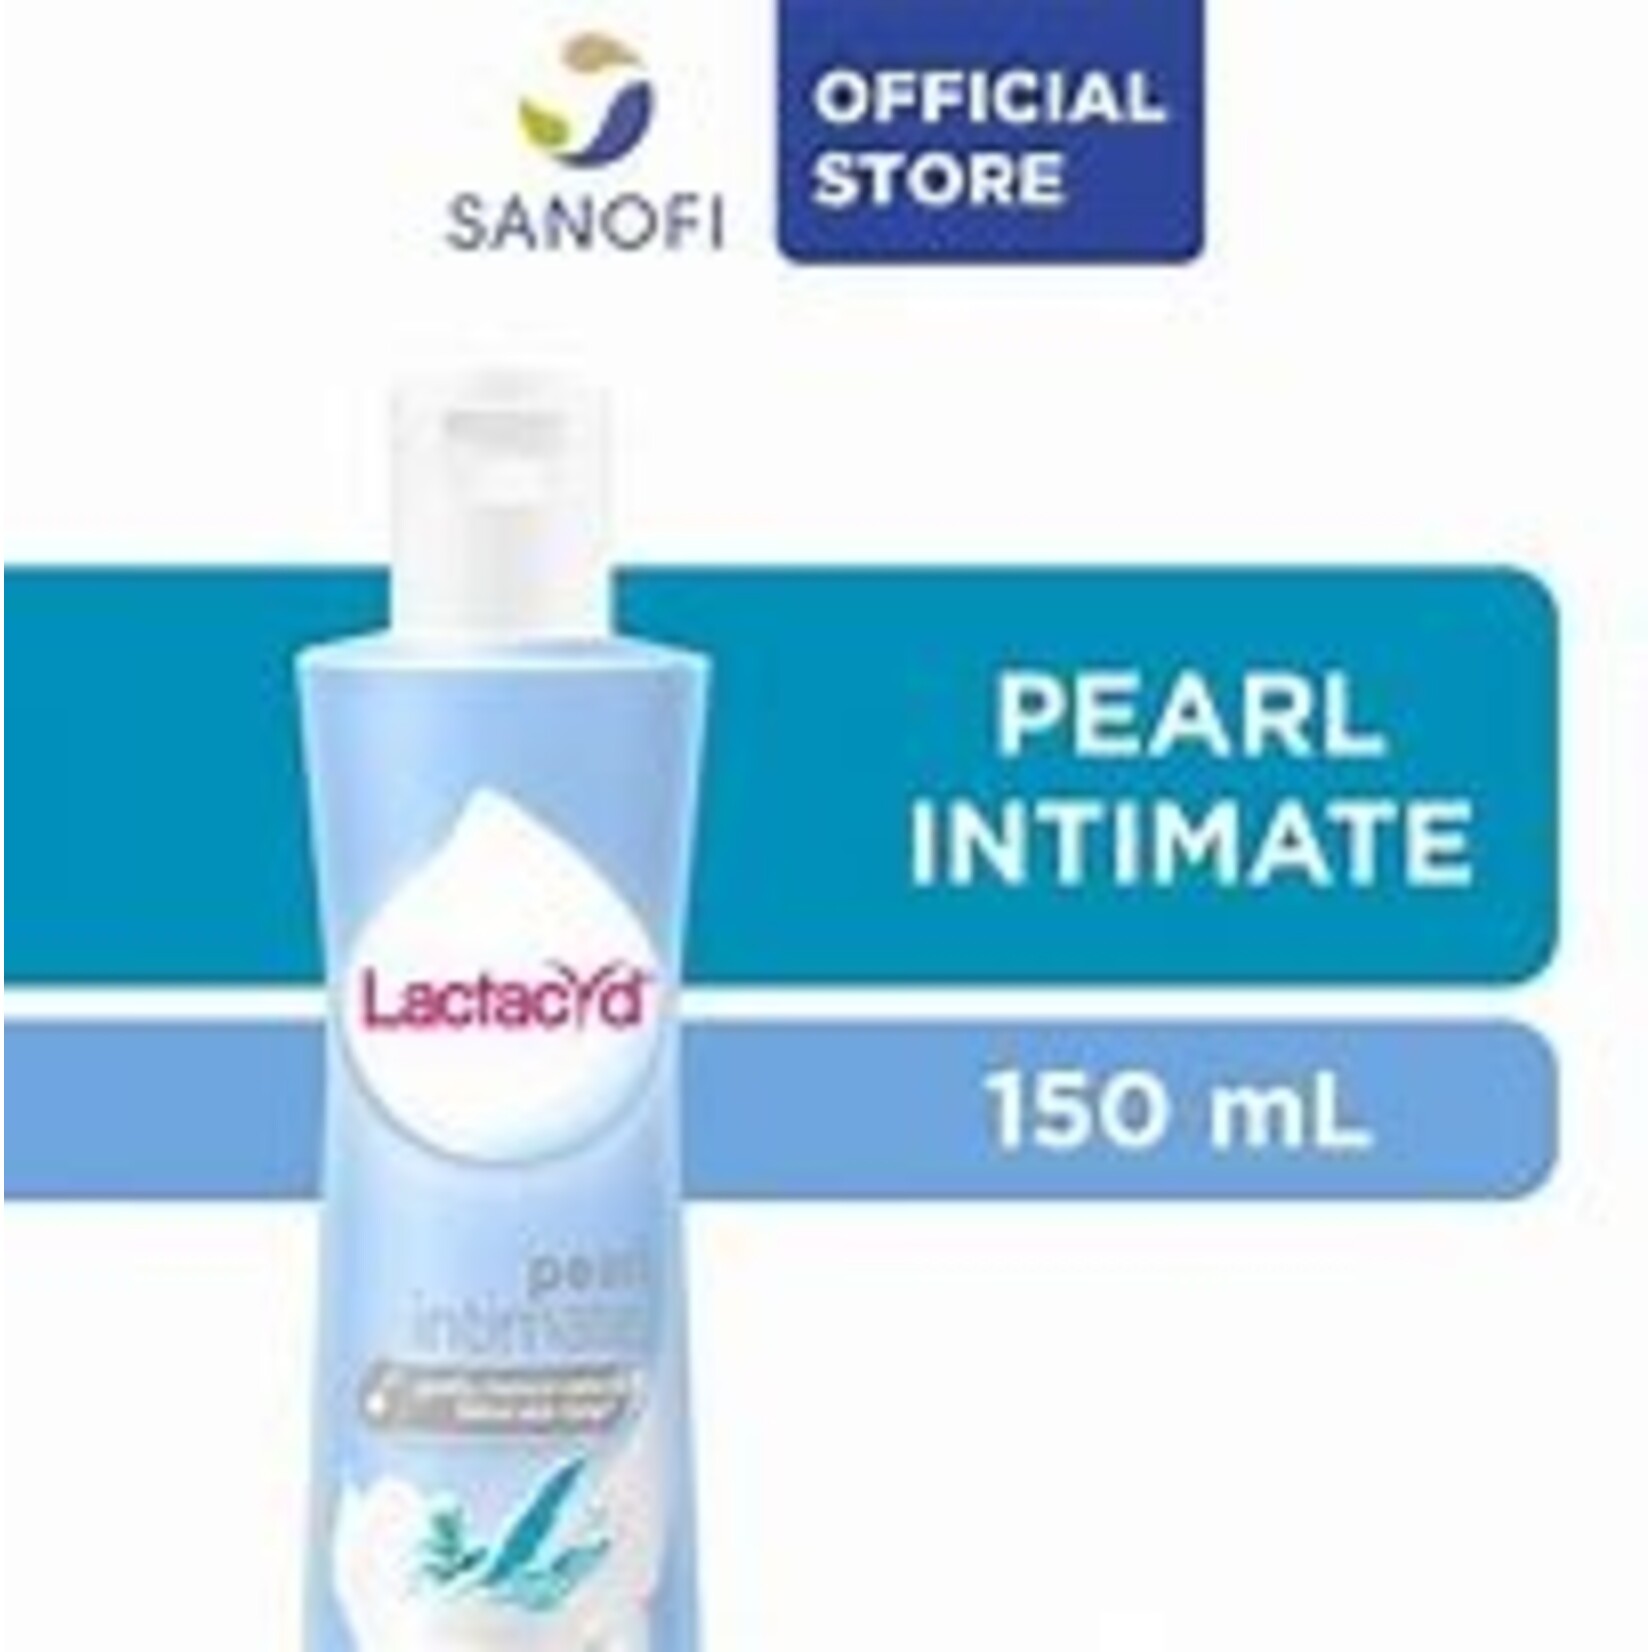 Lactacyd Lactacyd Pearl lavage intime, 150 ml